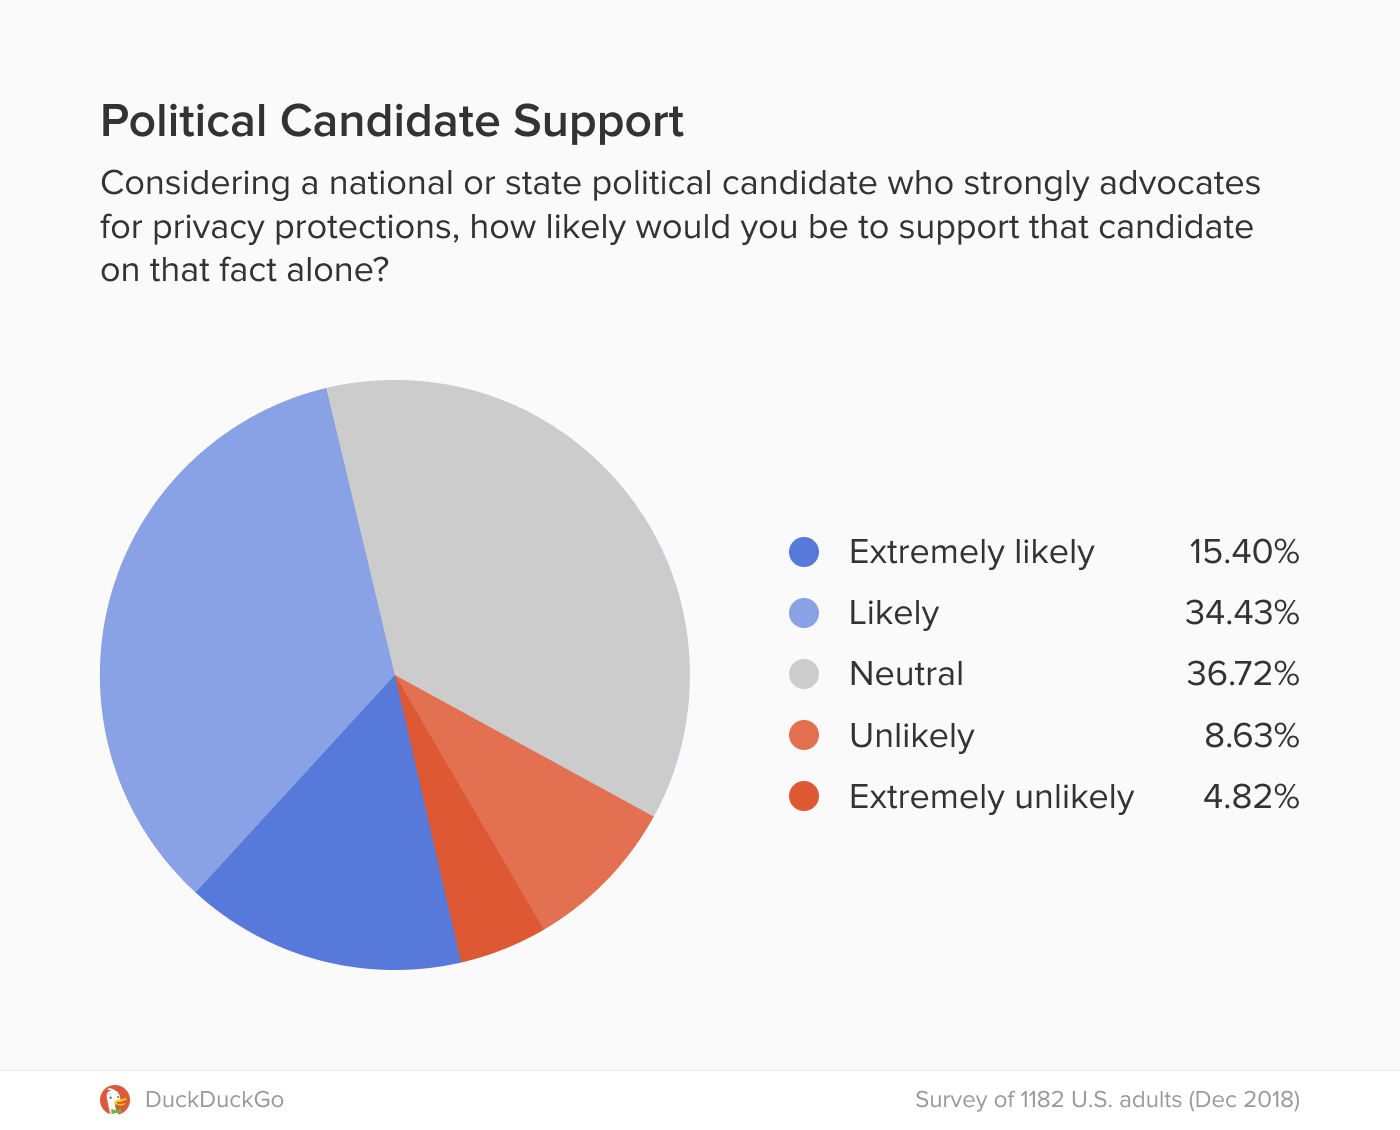 Chart showing strong support for political candidates that advocate for privacy protections.